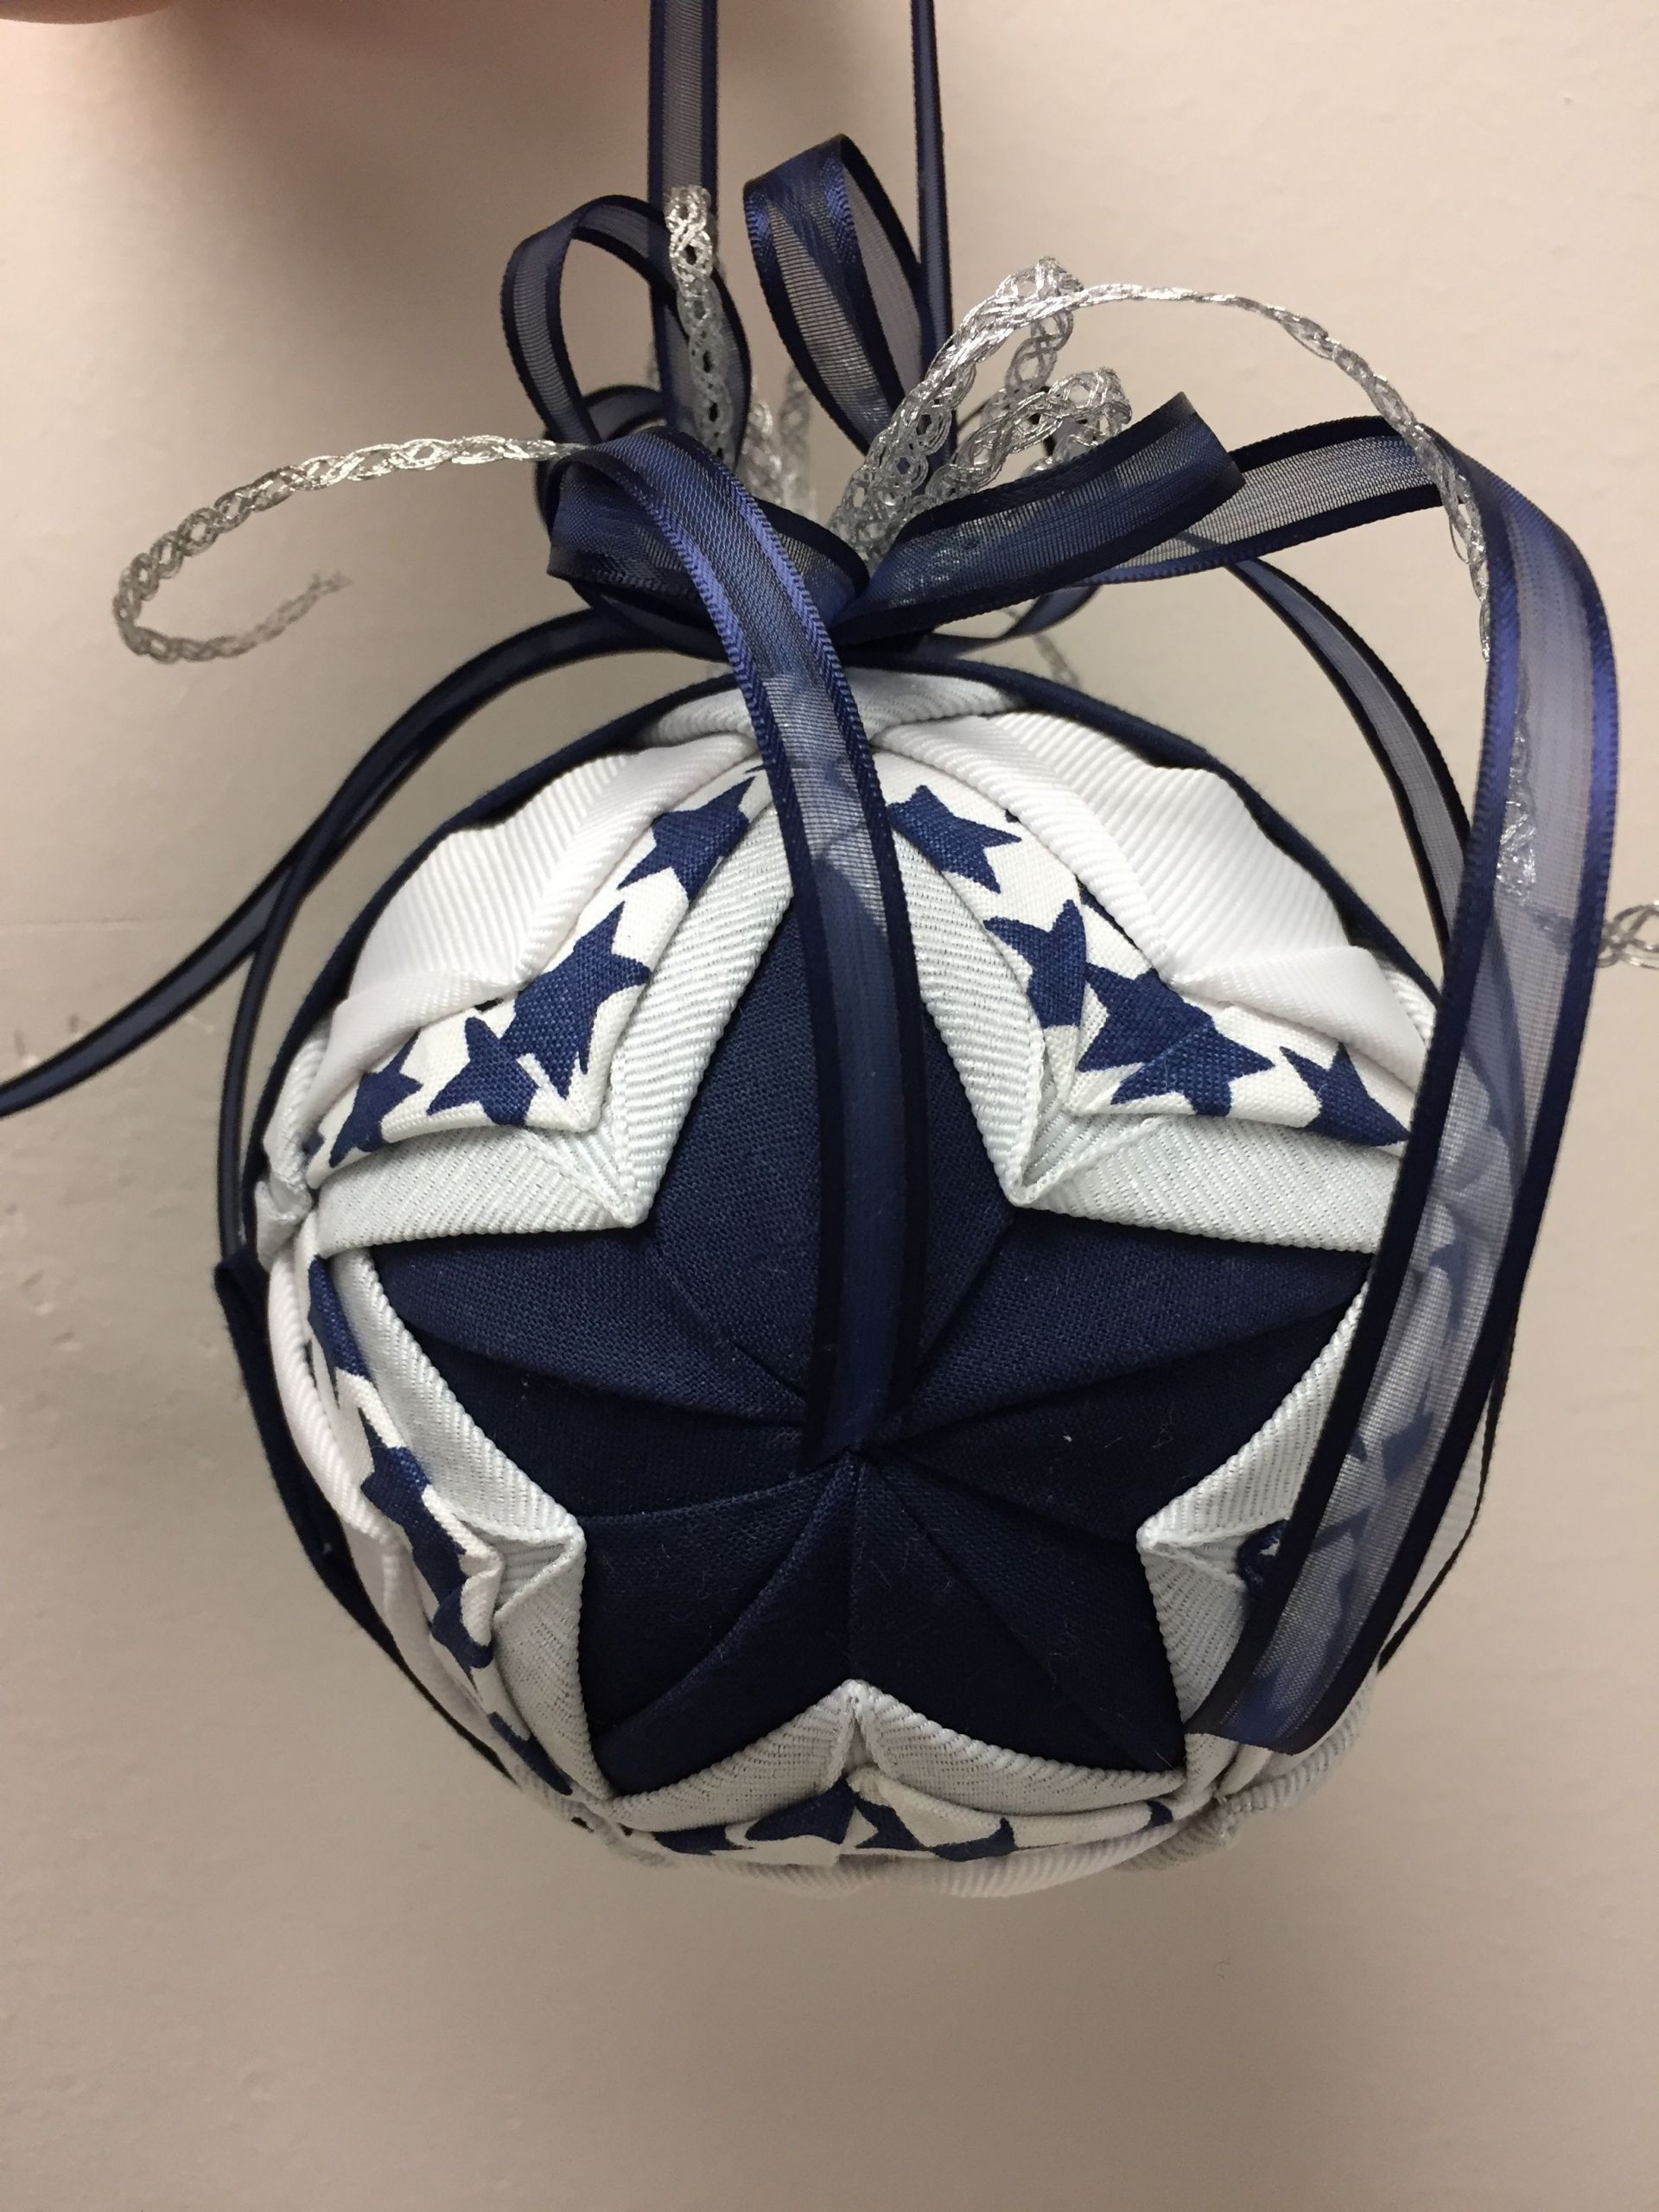 Dallas Cowboys Christmas Gift Ideas
 Dallas cowboys inspired quilted ornament